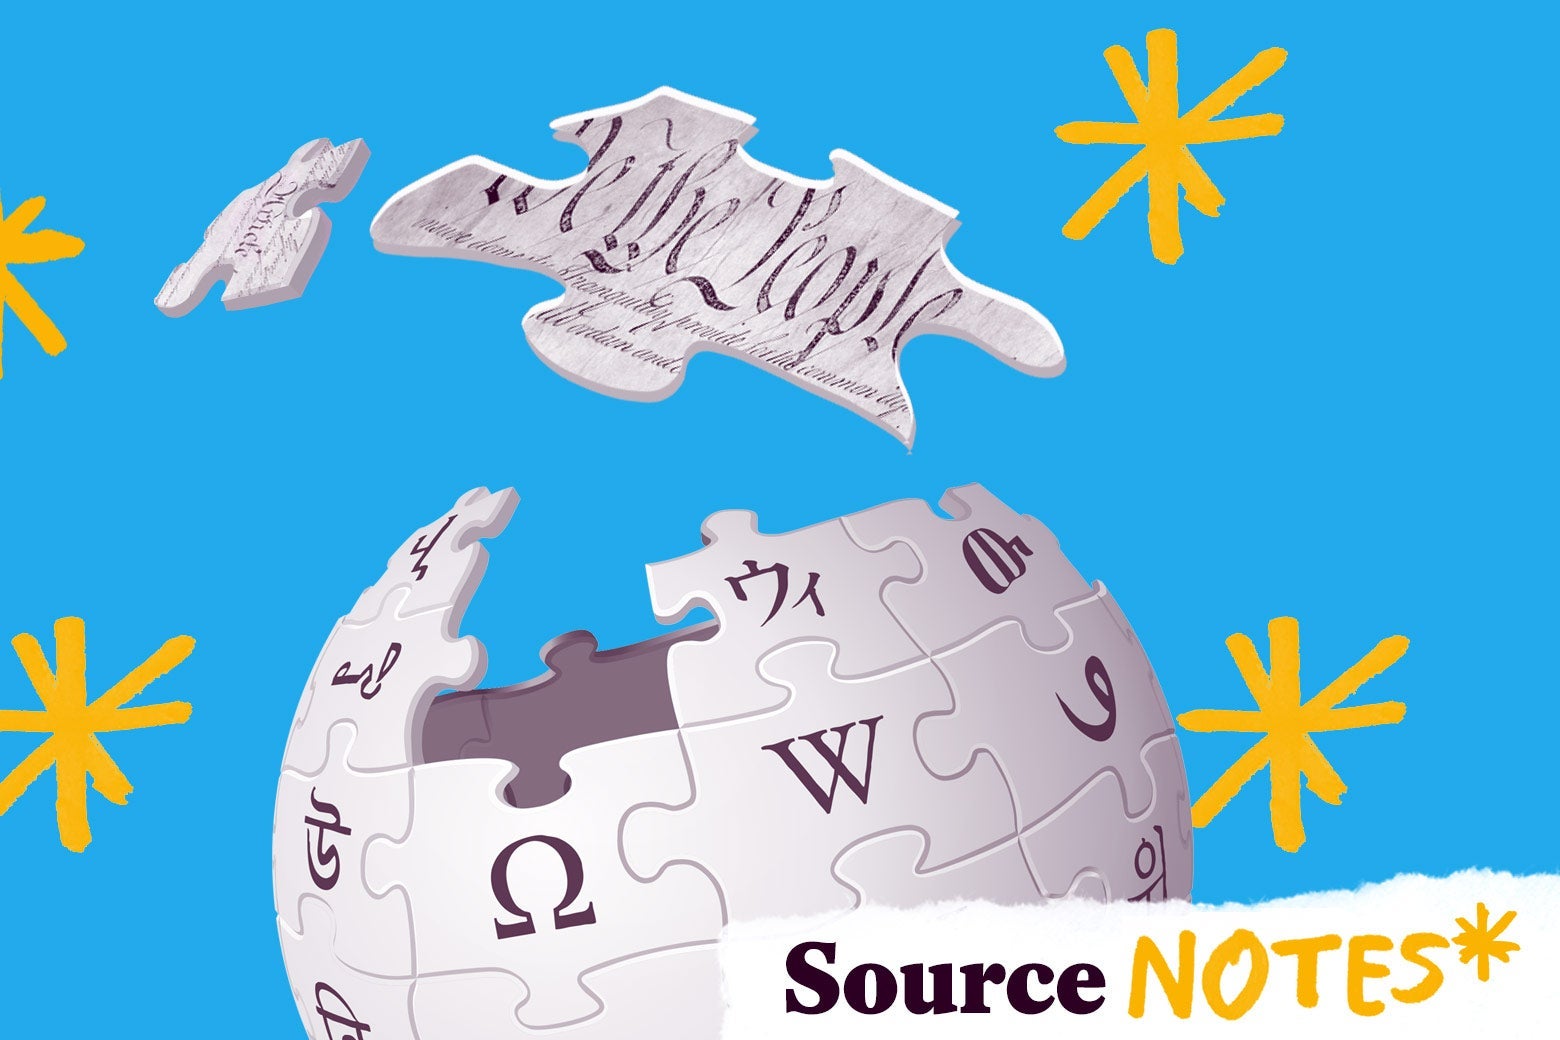 The Wikipedia globe puzzle logo, with one piece that reads "We the People" floating above.